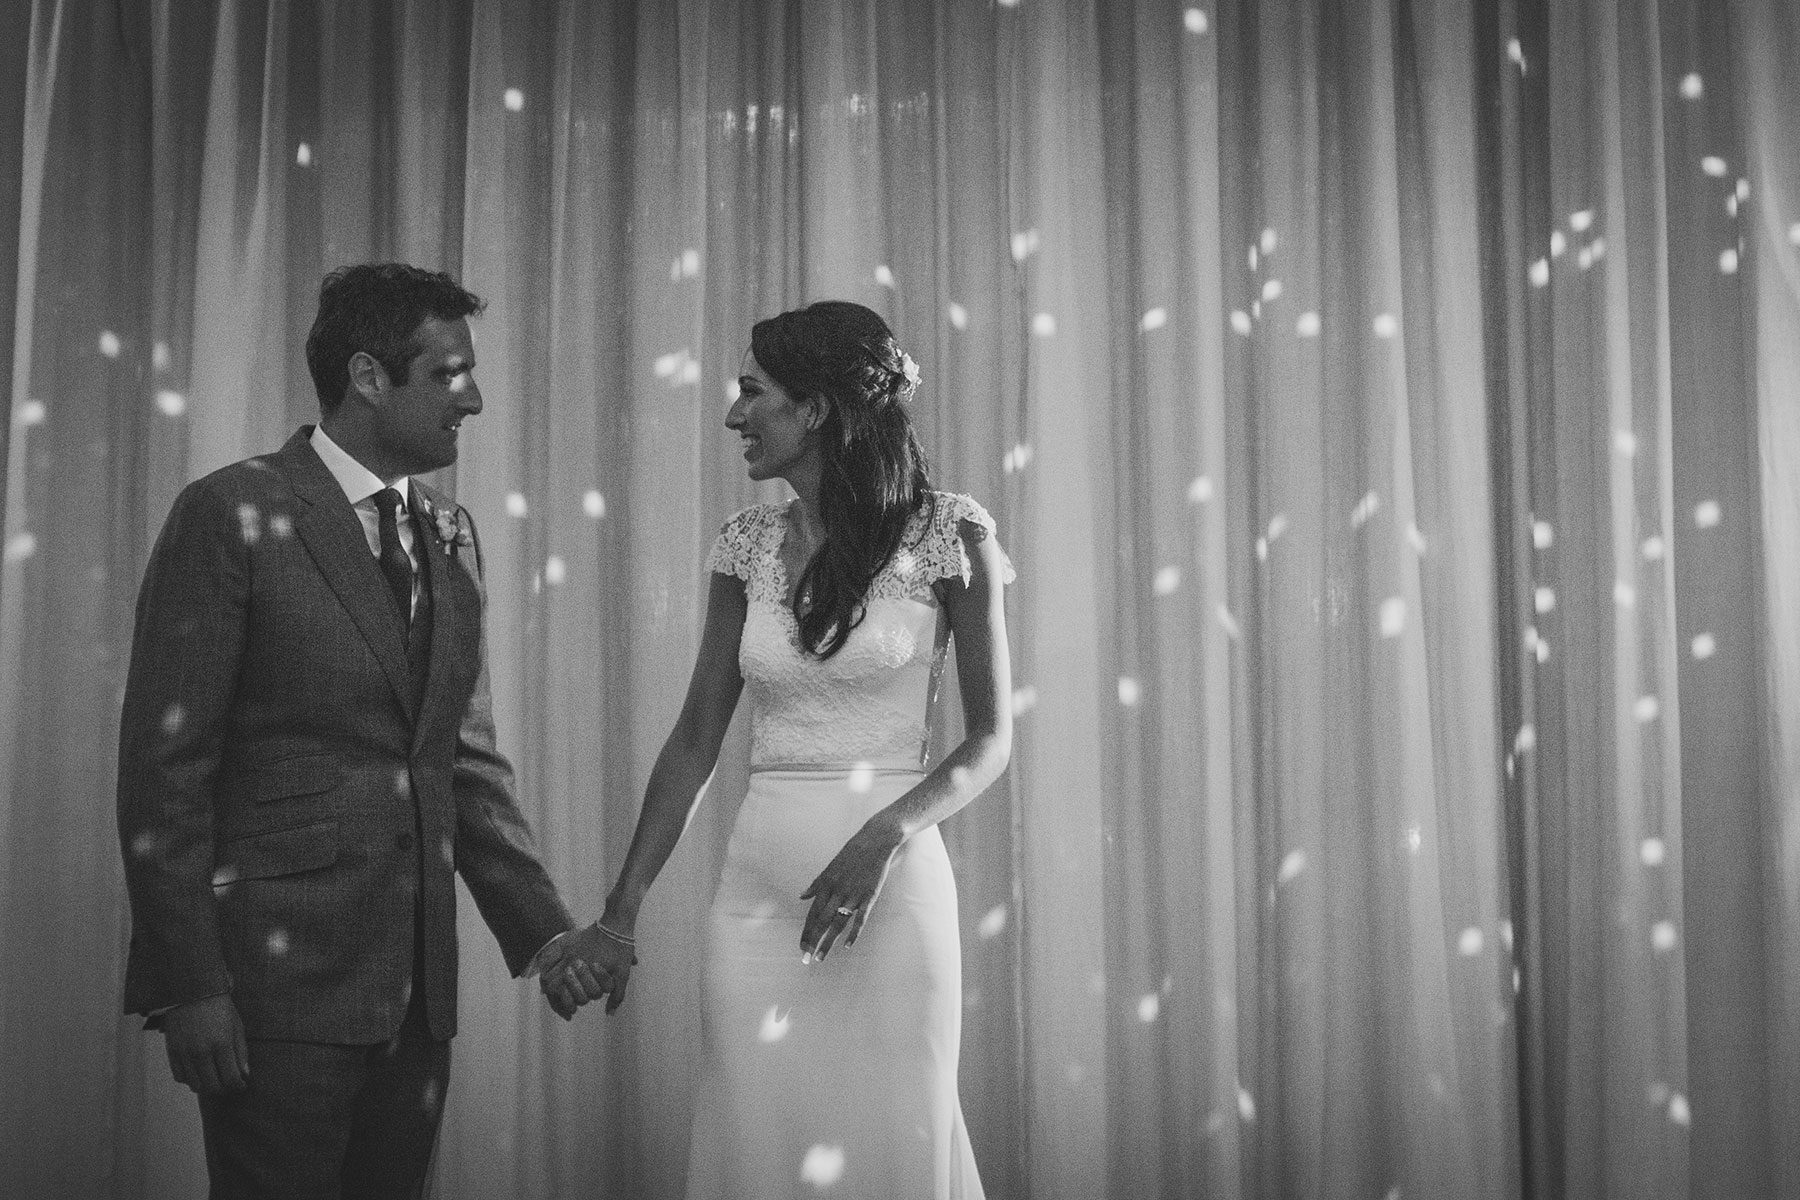 Dancing time - Reportage Wedding Photography in Cheltenham | Bullit Photography